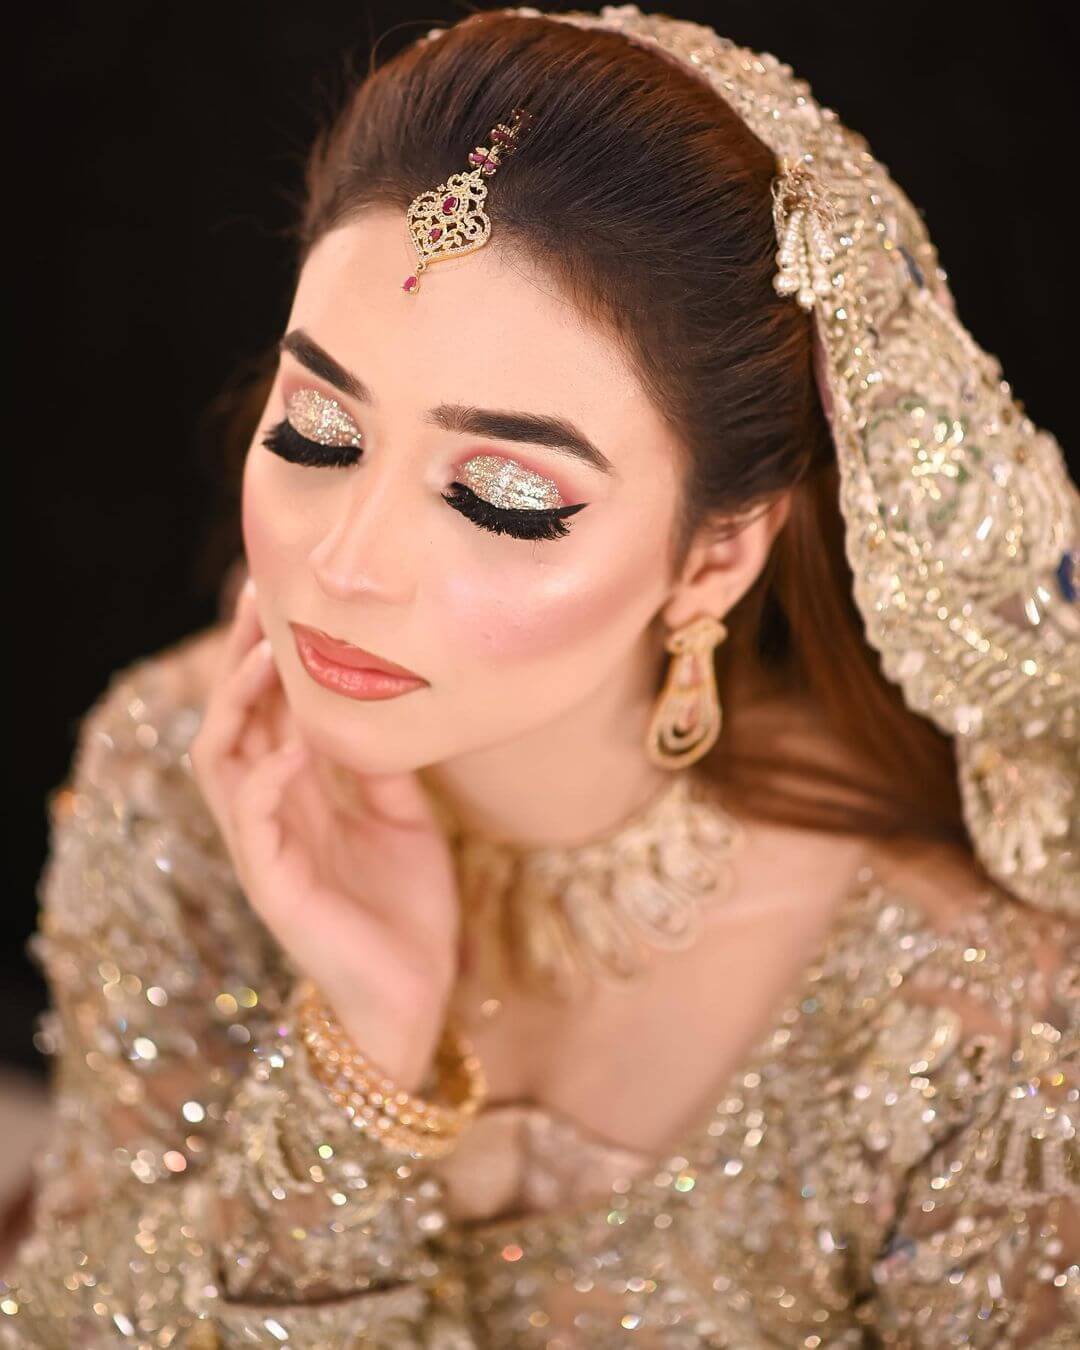 Dazzling Glittery Eye Makeup for Your Special Day